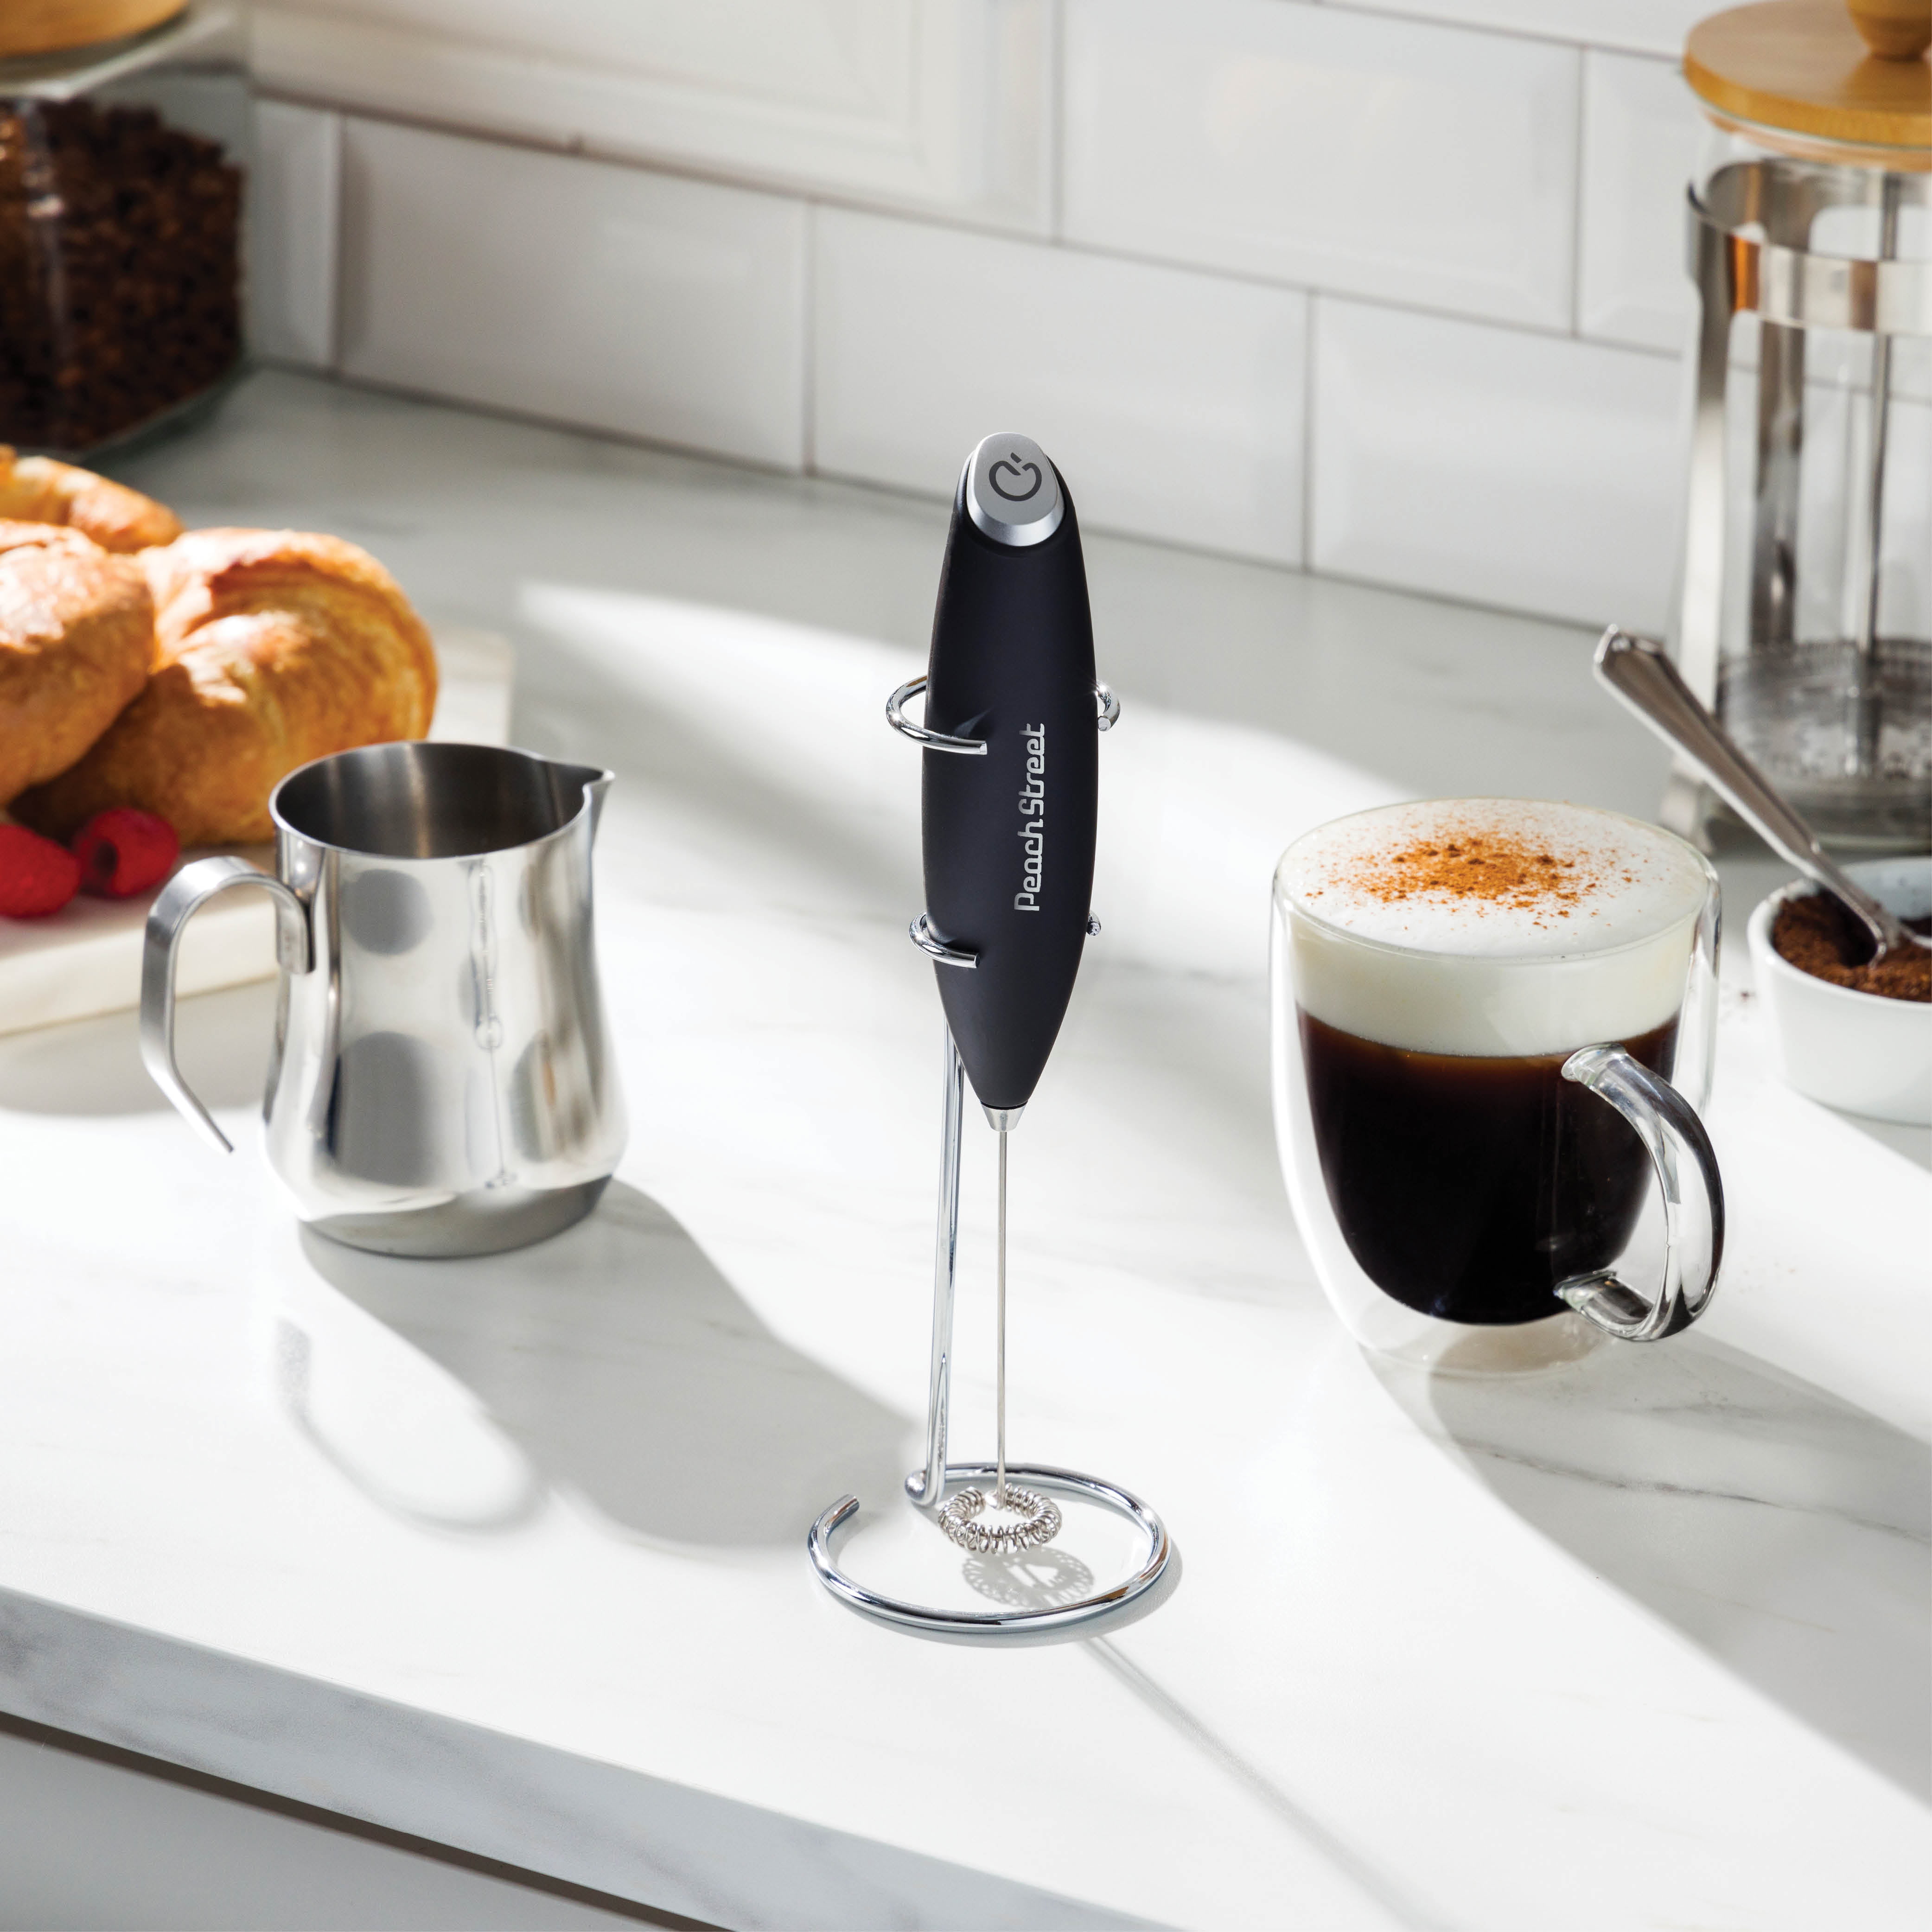 PowerLix Powerful Handheld Milk Frother With Stand Battery Operated Foam  Maker Frother Wand For Coffee, Latte, Cappuccino, Hot Chocolate, Mini Drink